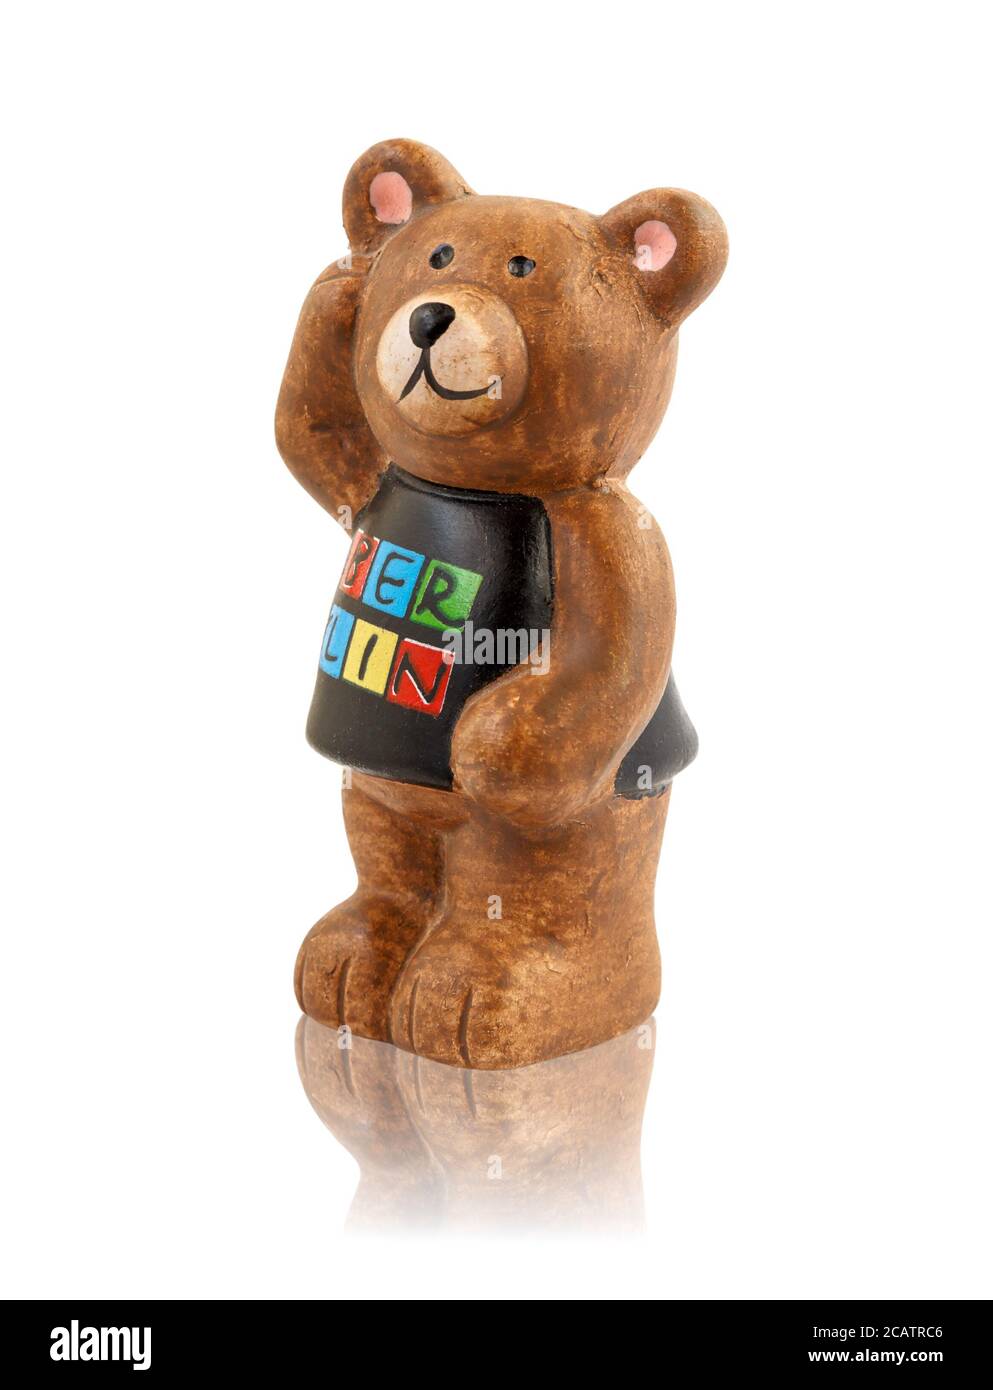 Details about   Plush Teddy Bear 11" brown with Germany Cute nett Deutschland flag on front 